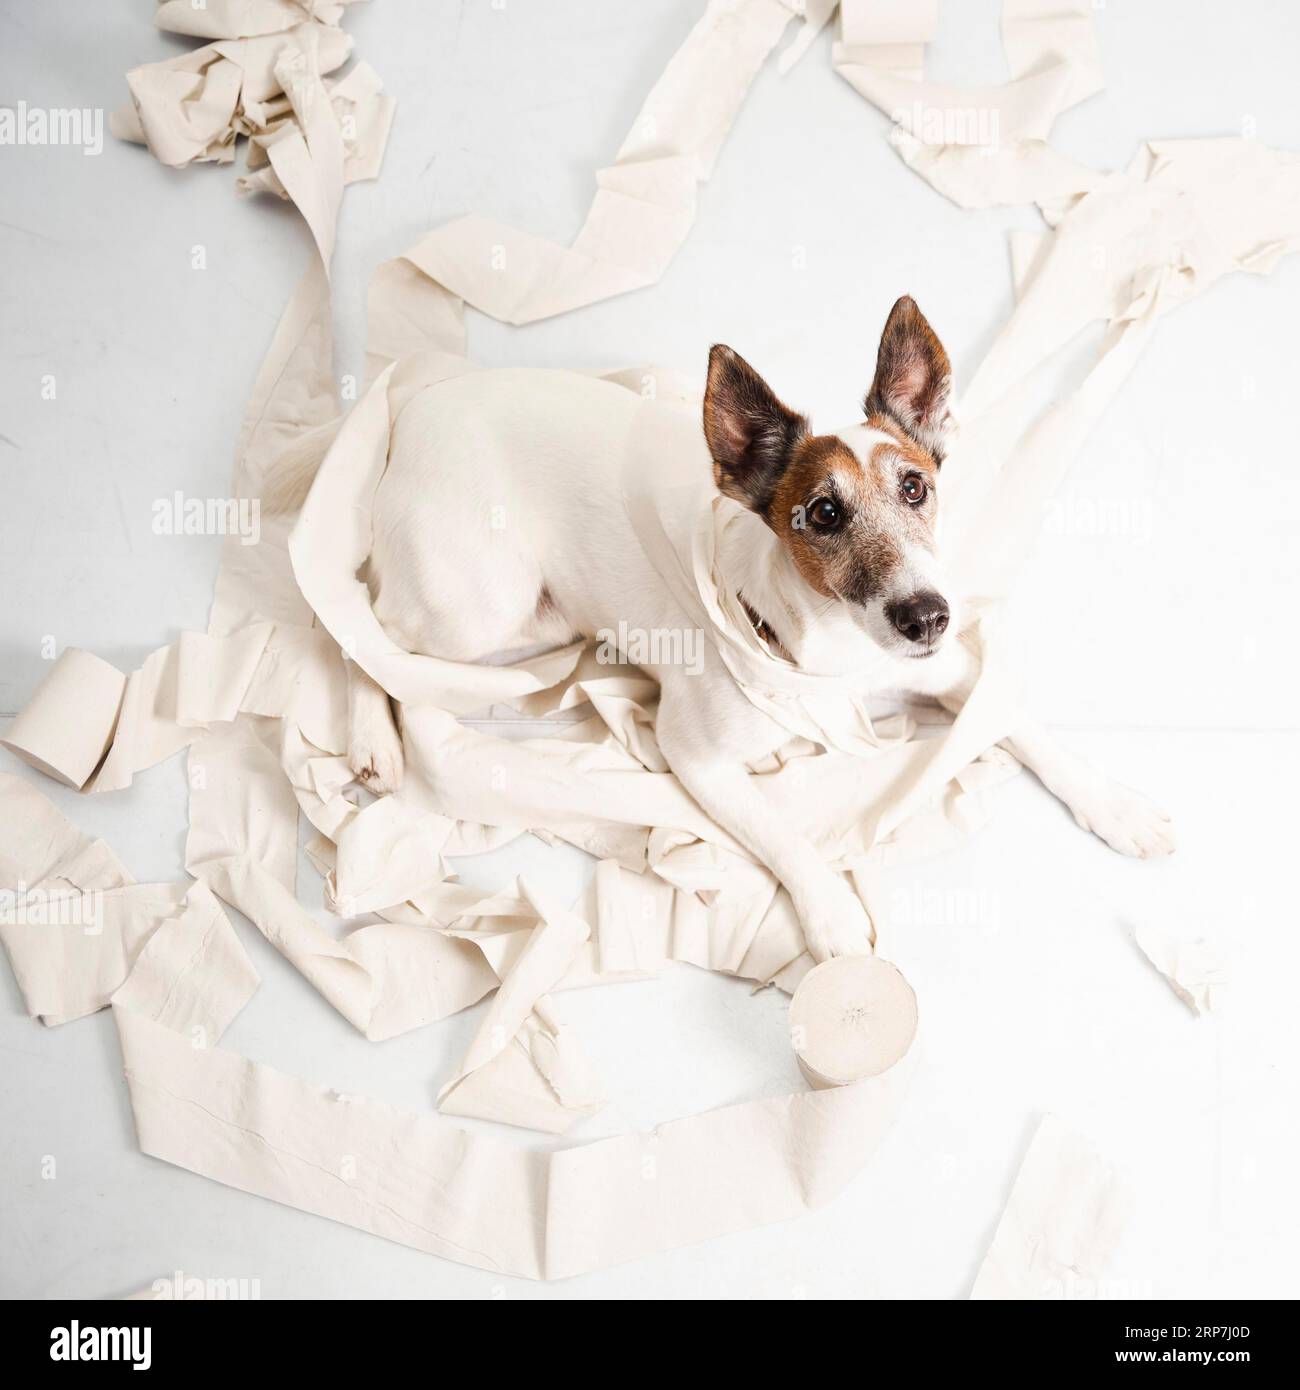 Cute dog making huge mess with rolling paper Stock Photo